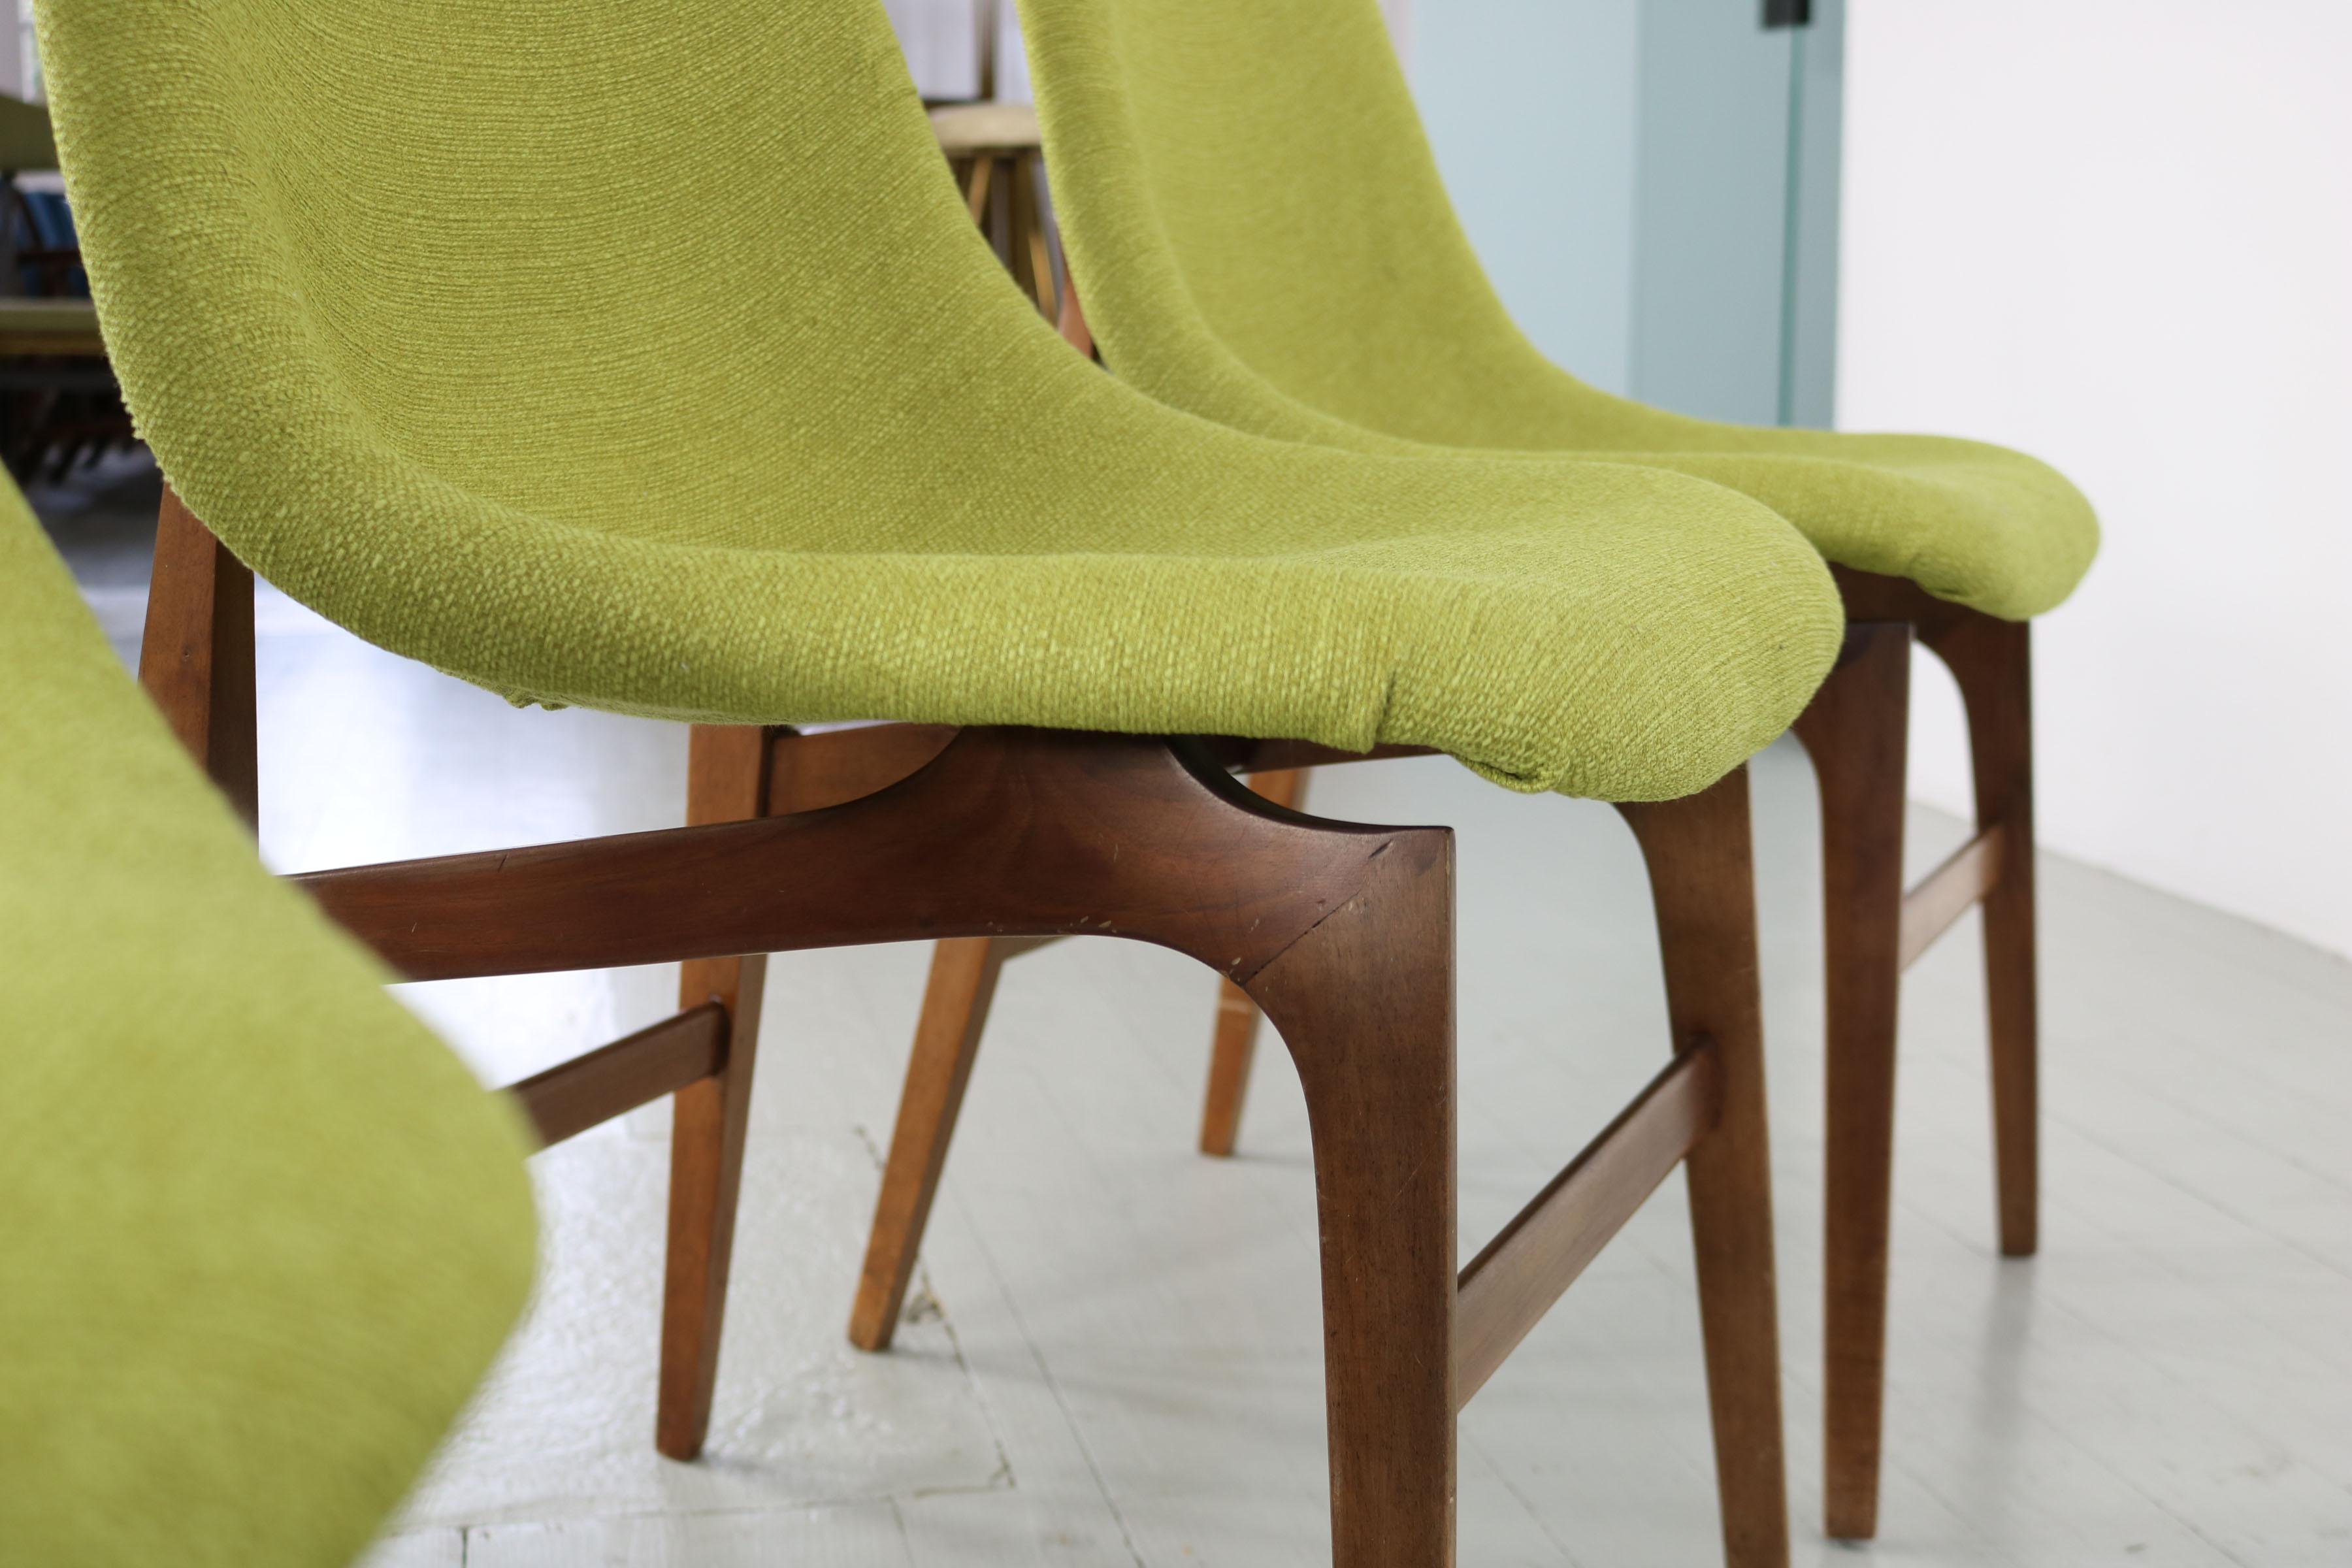 Set of 4 Busnelli Meda Teak Chairs, Italy 1960s For Sale 12